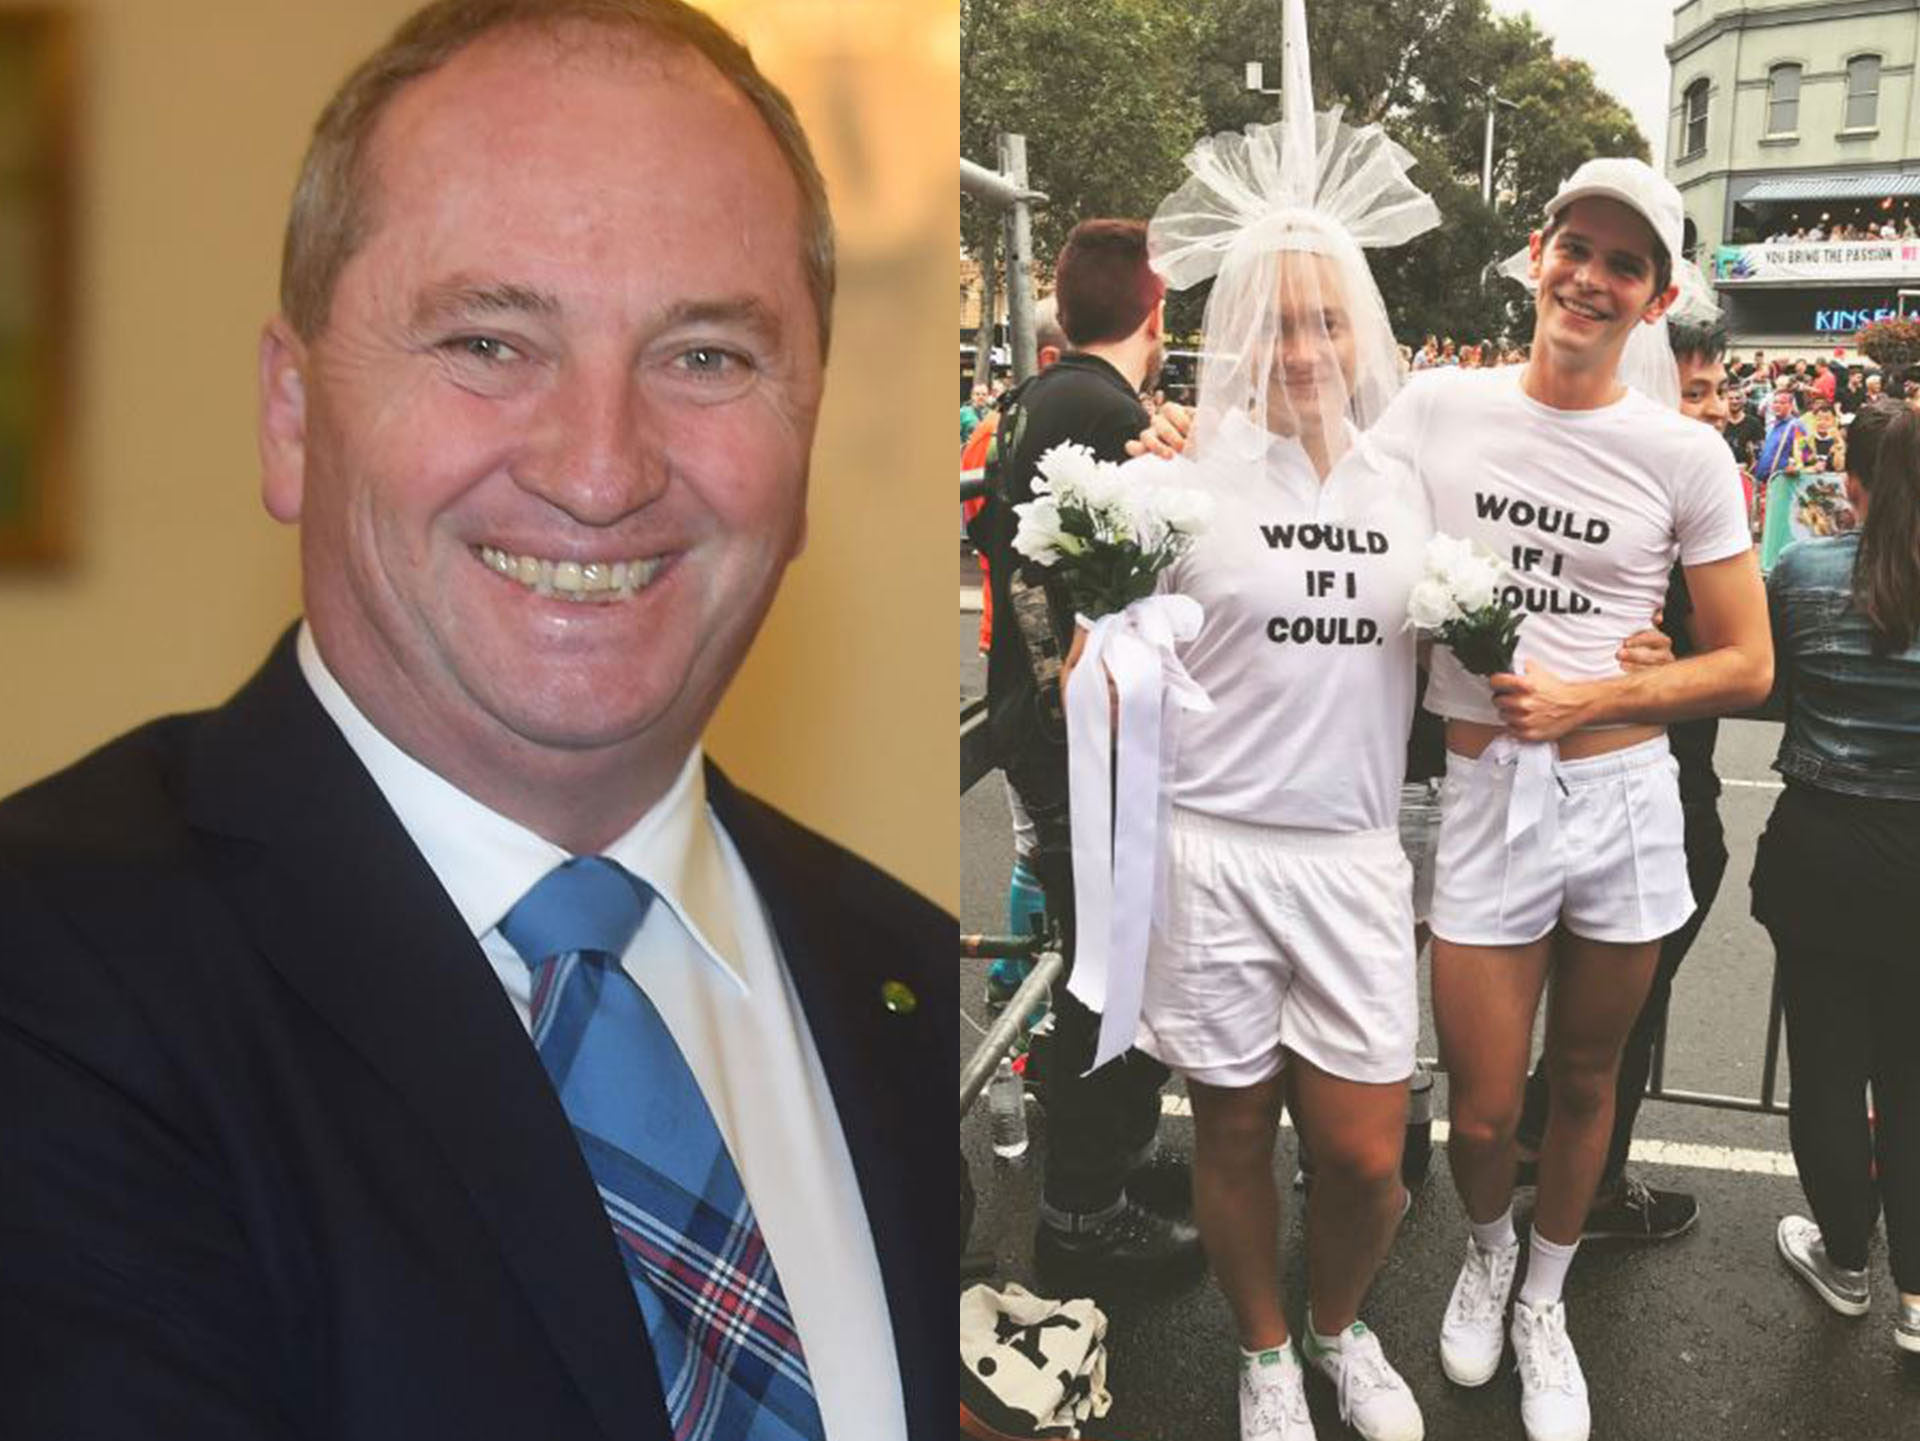 Barnaby Joyce dismissed gay marriage as a niche issue